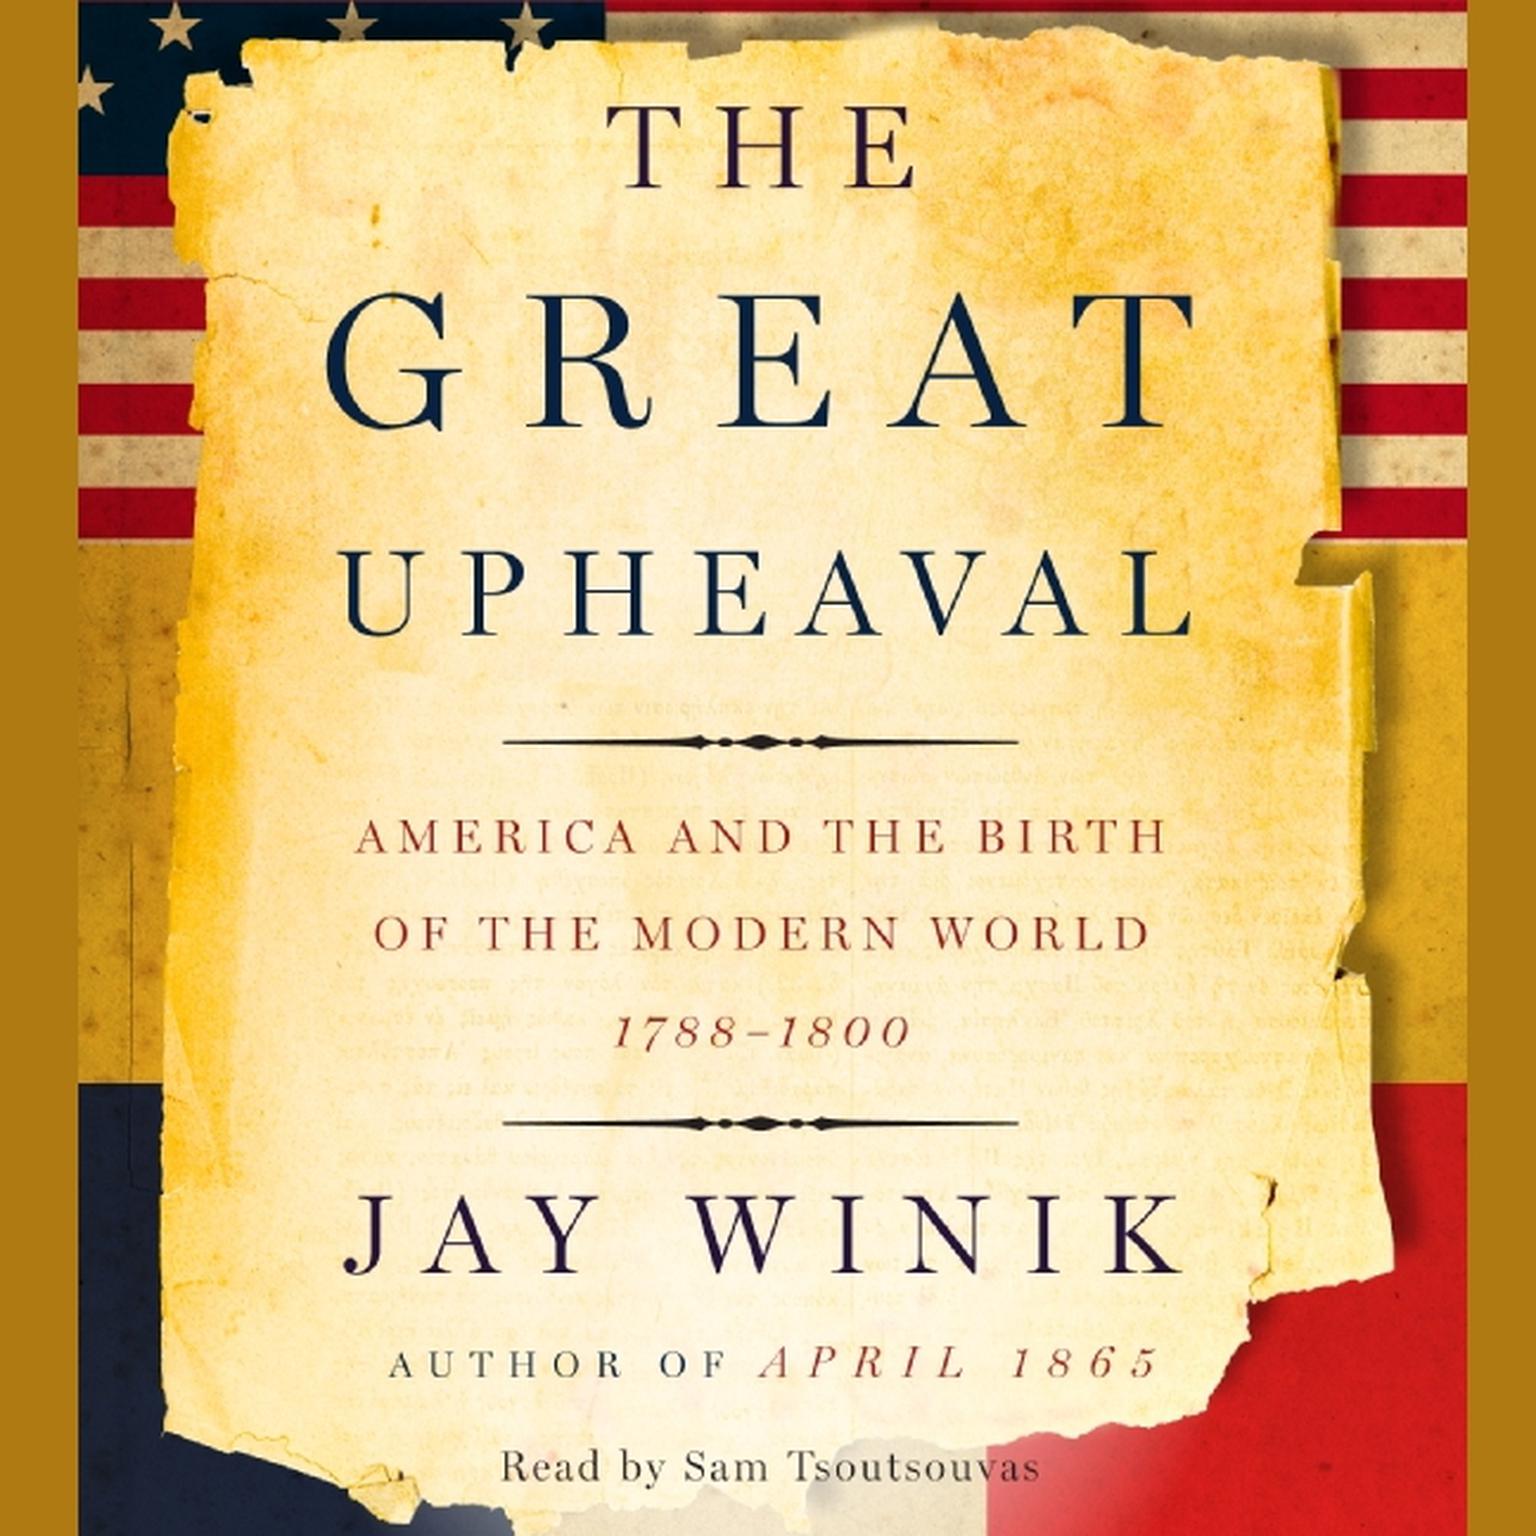 The Great Upheaval (Abridged): America and the Birth of the Modern World, 1788–1800 Audiobook, by Jay Winik